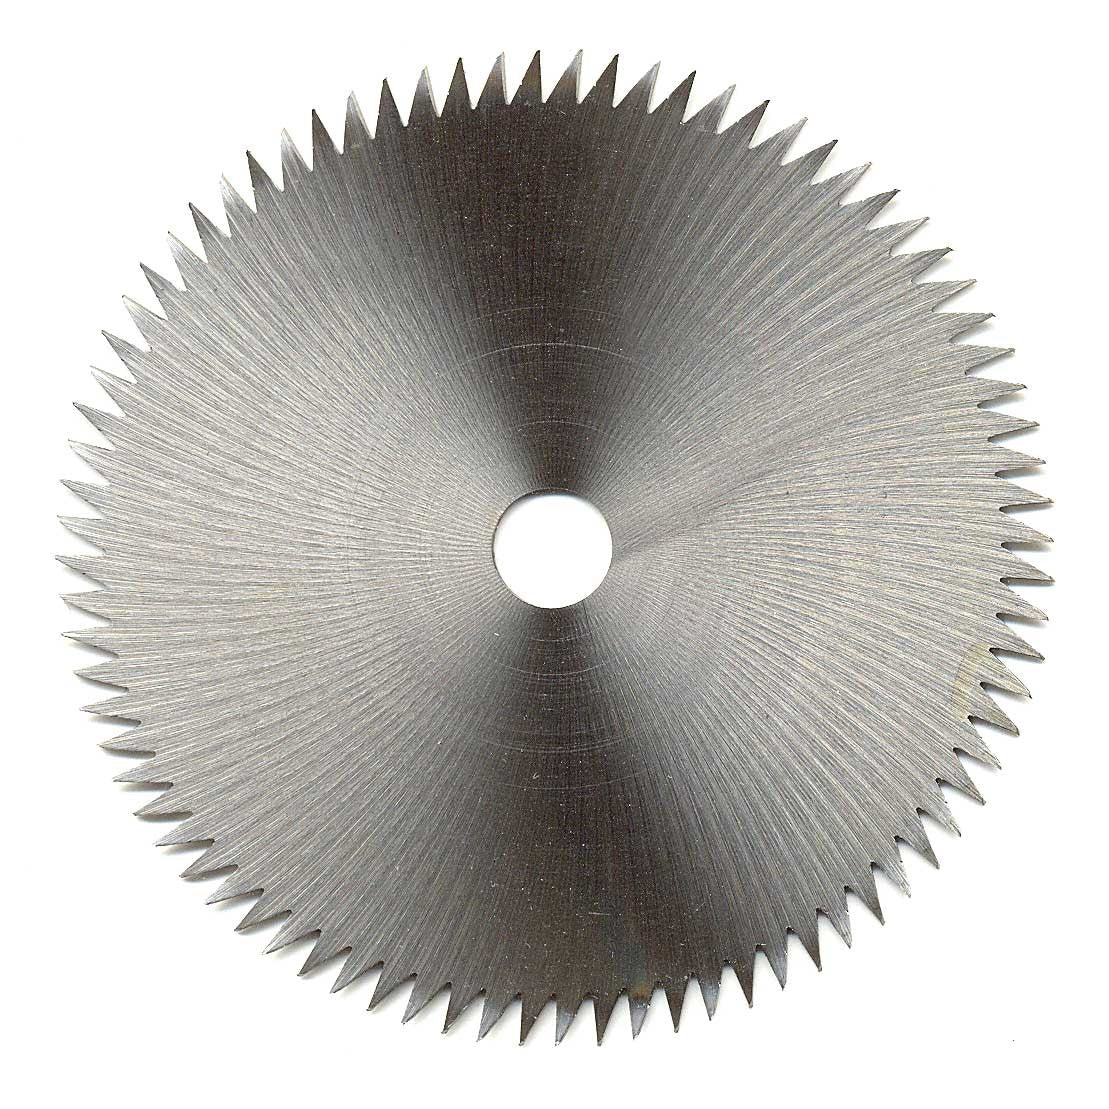 80 Tooth Saw Blade (3 - 1/4 Inch Dia., 10mm Hole) - Micro - Mark Saw Accessories